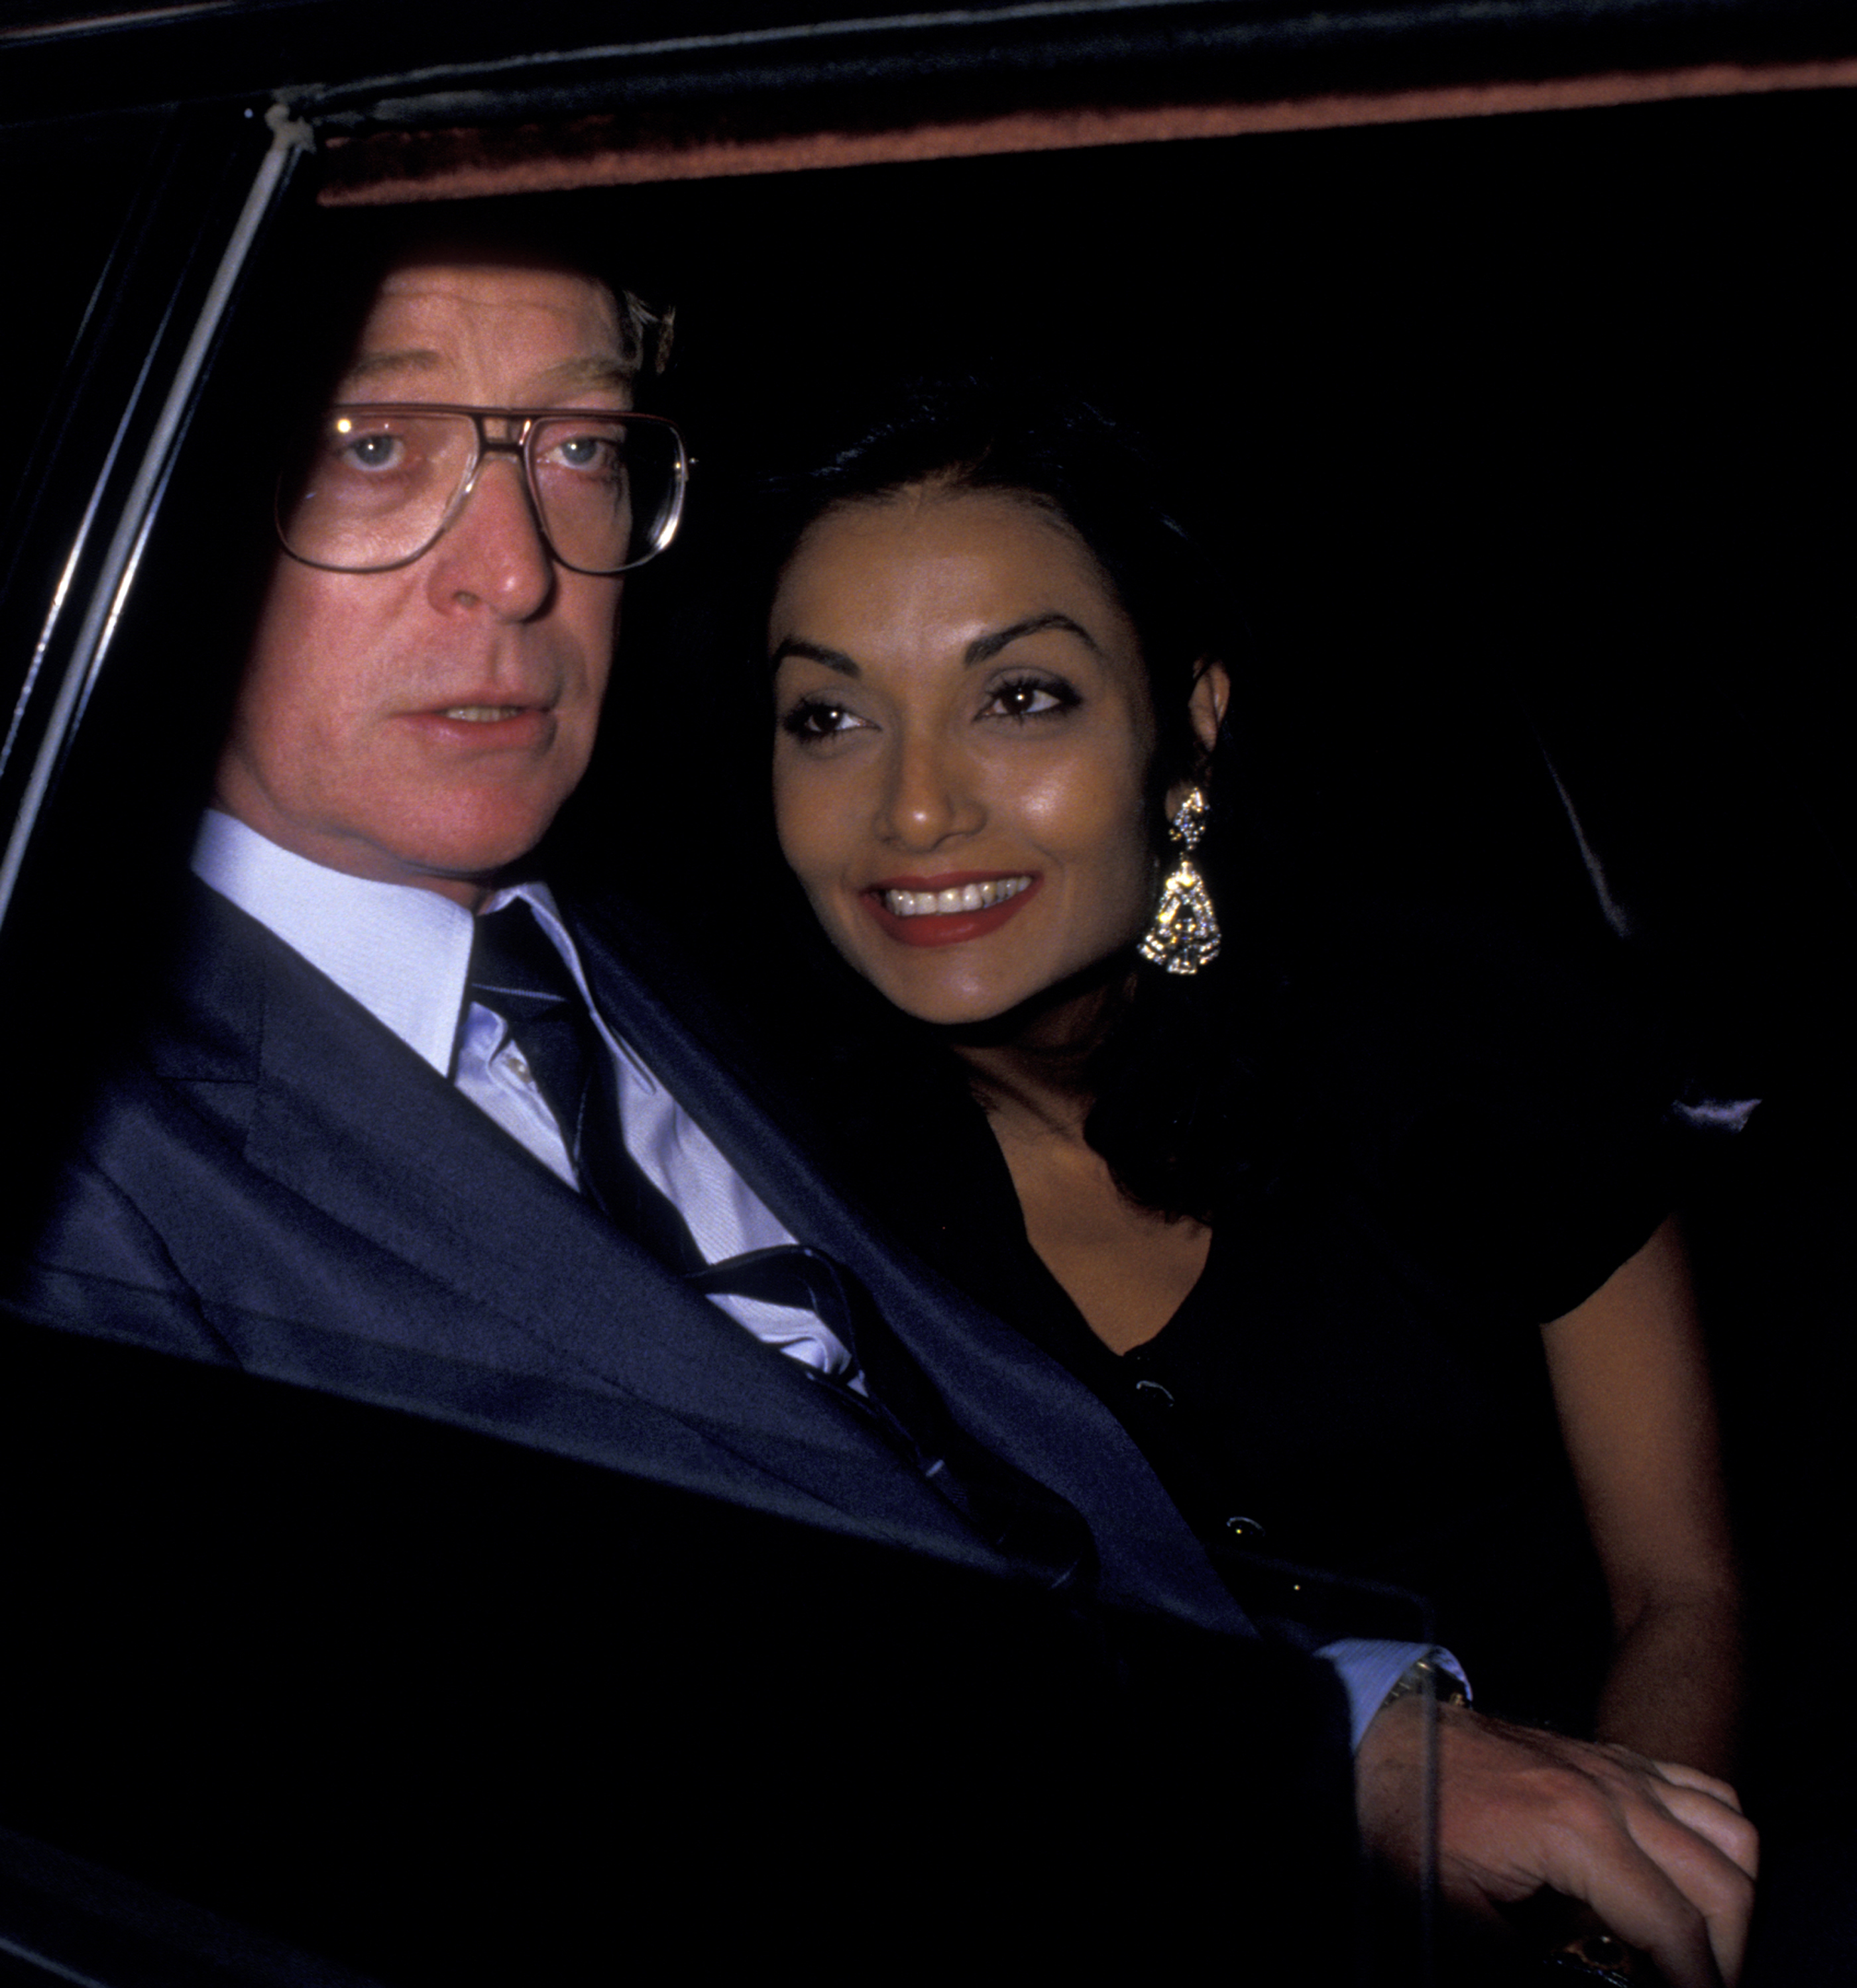 Actor Michael Caine and his wife Shakira Caine attend the premiere of "Fourth Protocol" at the Baronet Theater on August 24, 1987 in New York City | Source: Getty Images